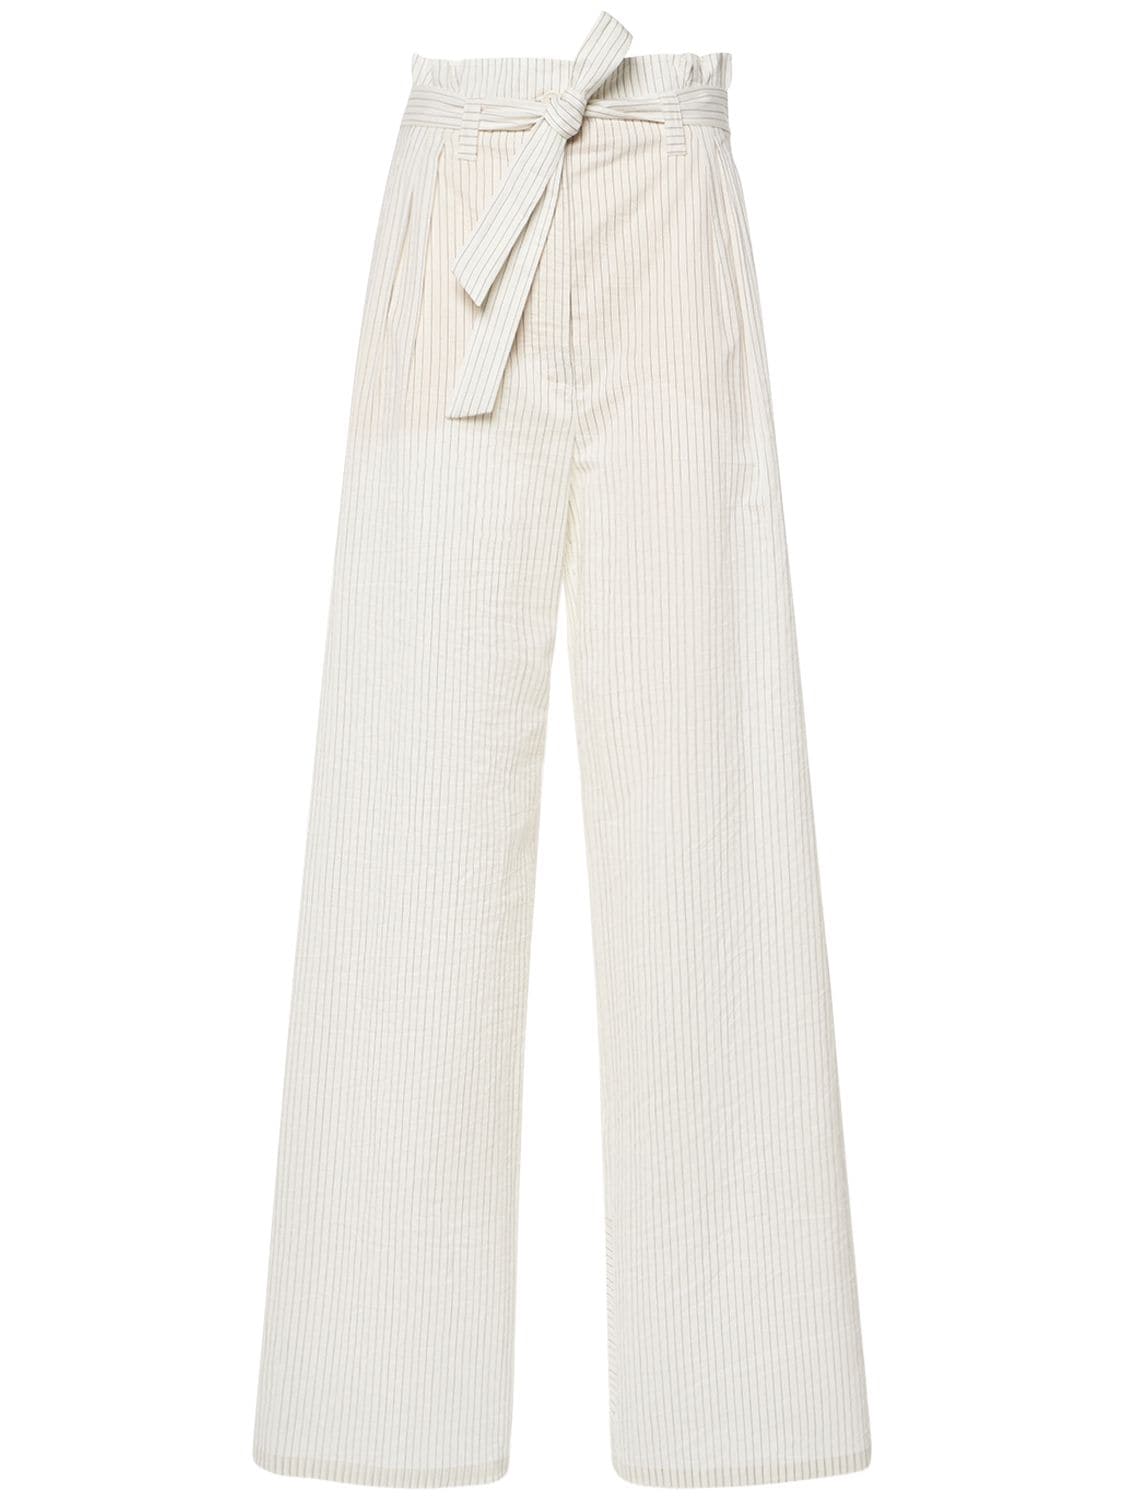 Image of Cotton Canvas Belted Wide Pants